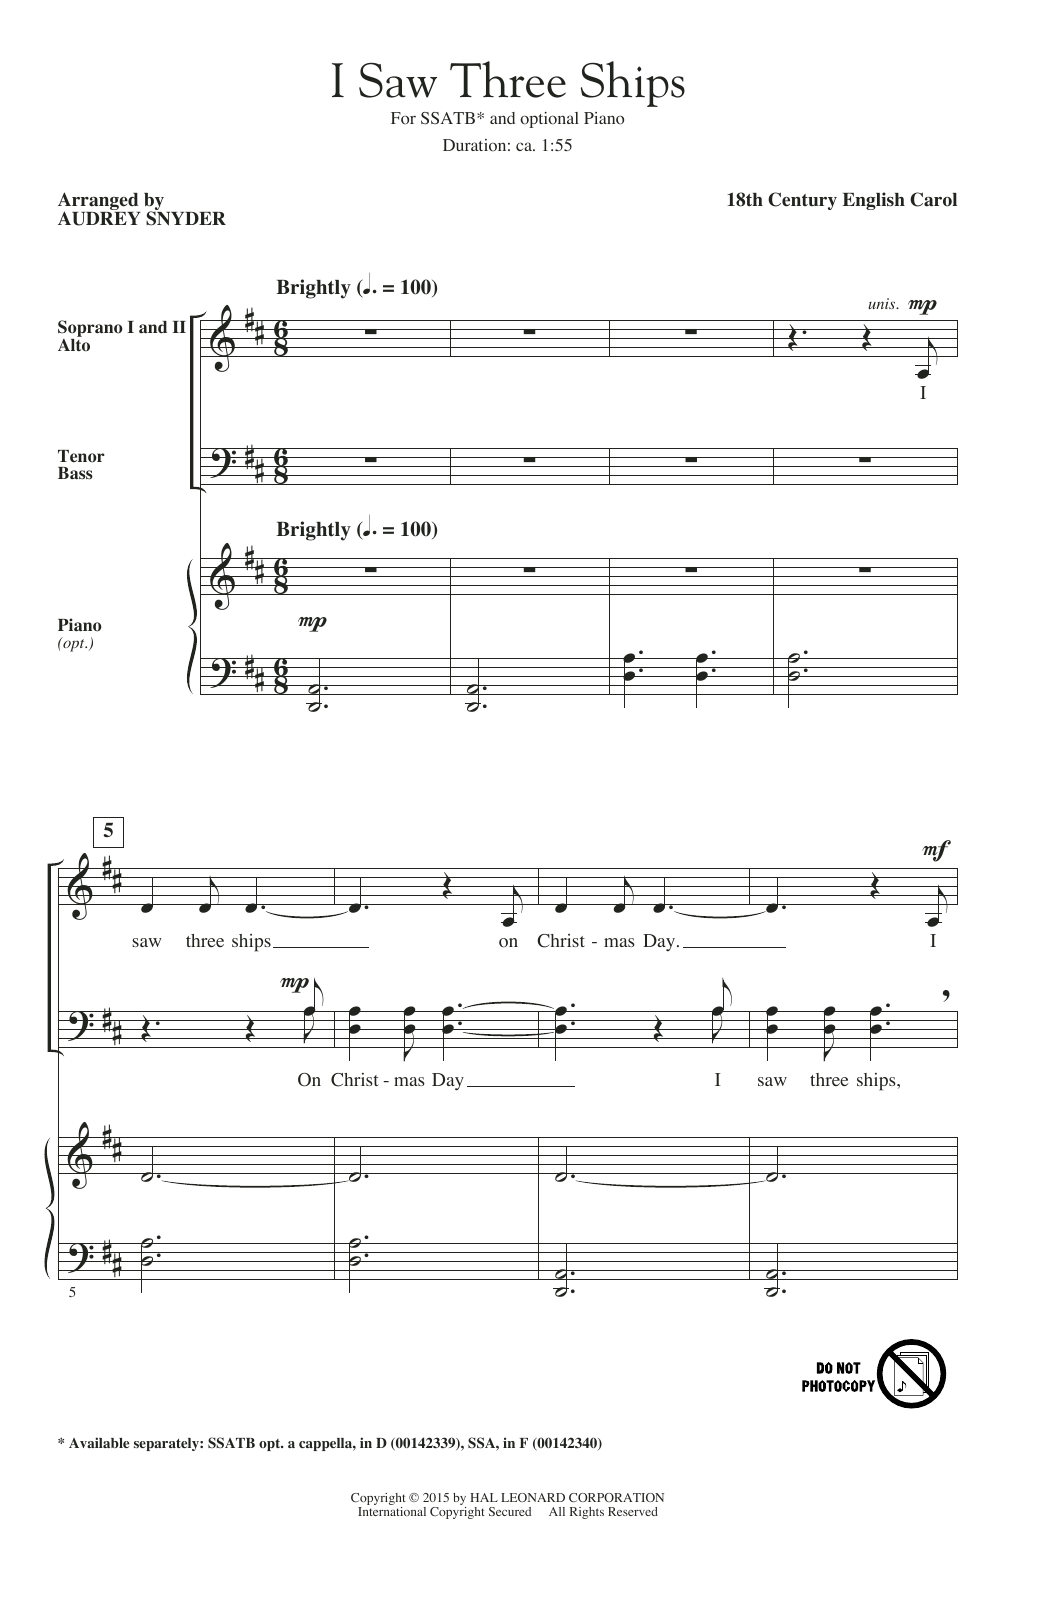 Download Audrey Snyder I Saw Three Ships Sheet Music